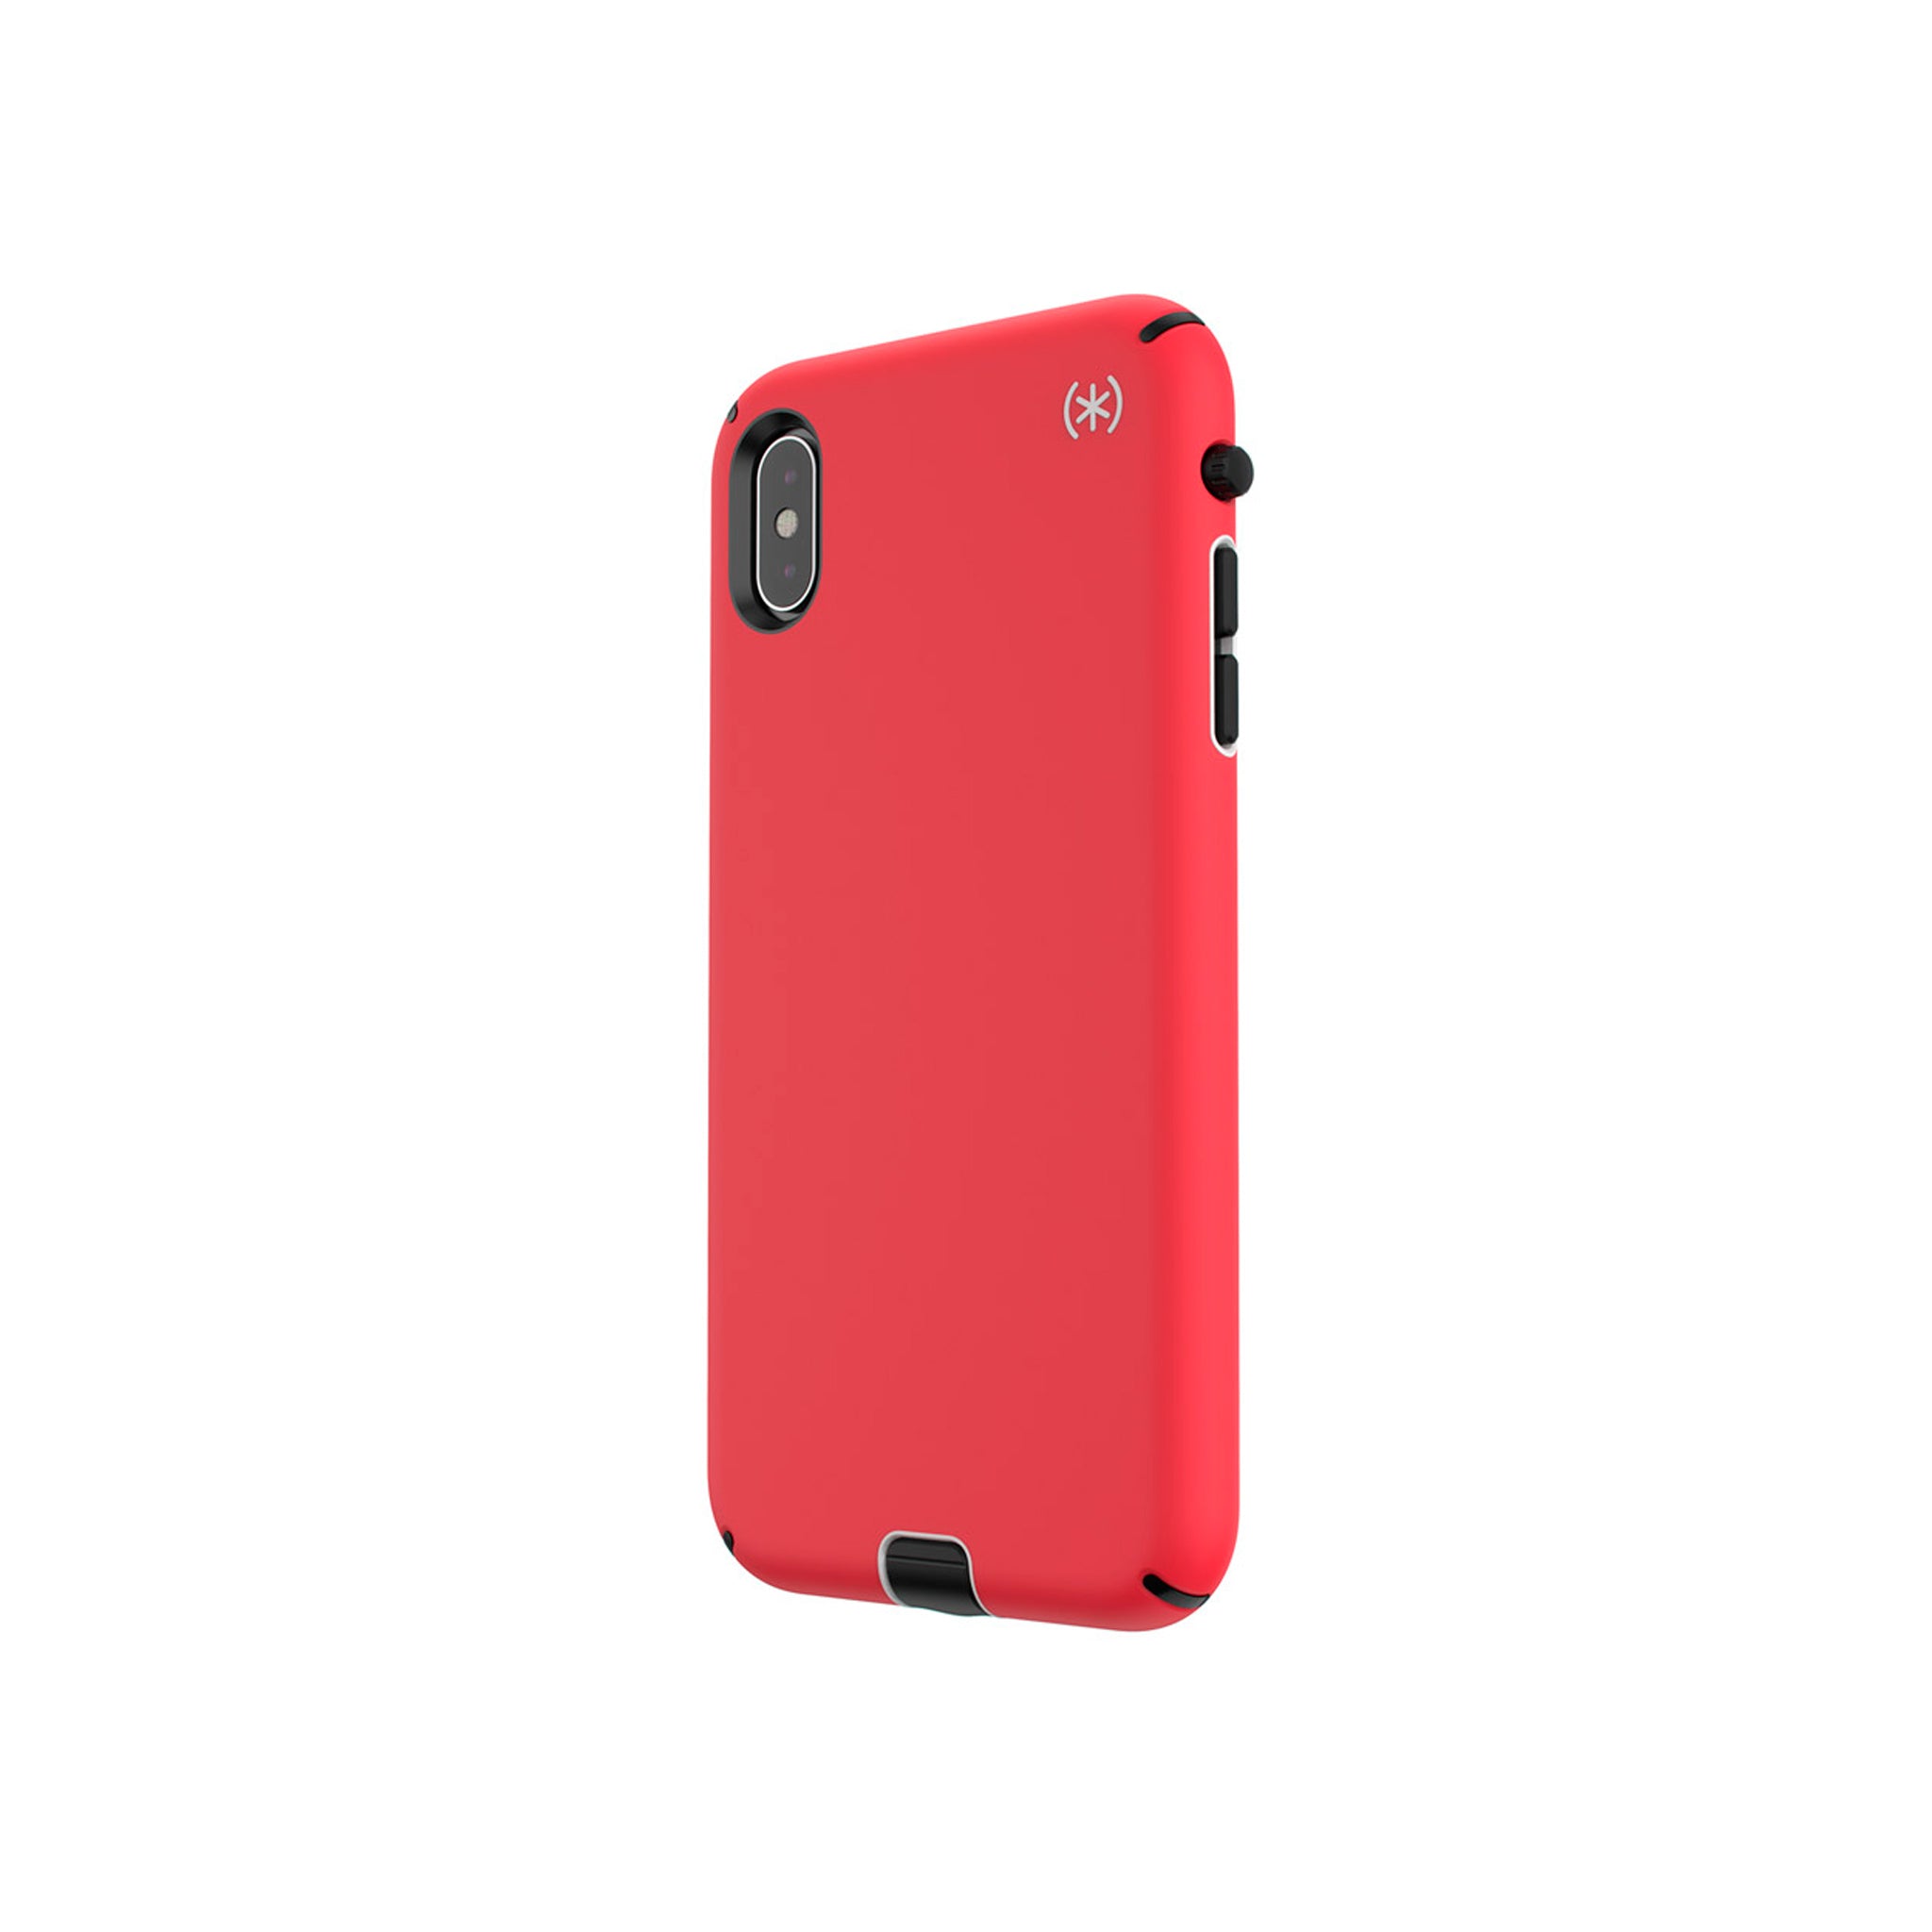 Speck - Presidio Sport Case For Apple Iphone Xs Max - Heartrate Red, Sidewalk Gray And Black